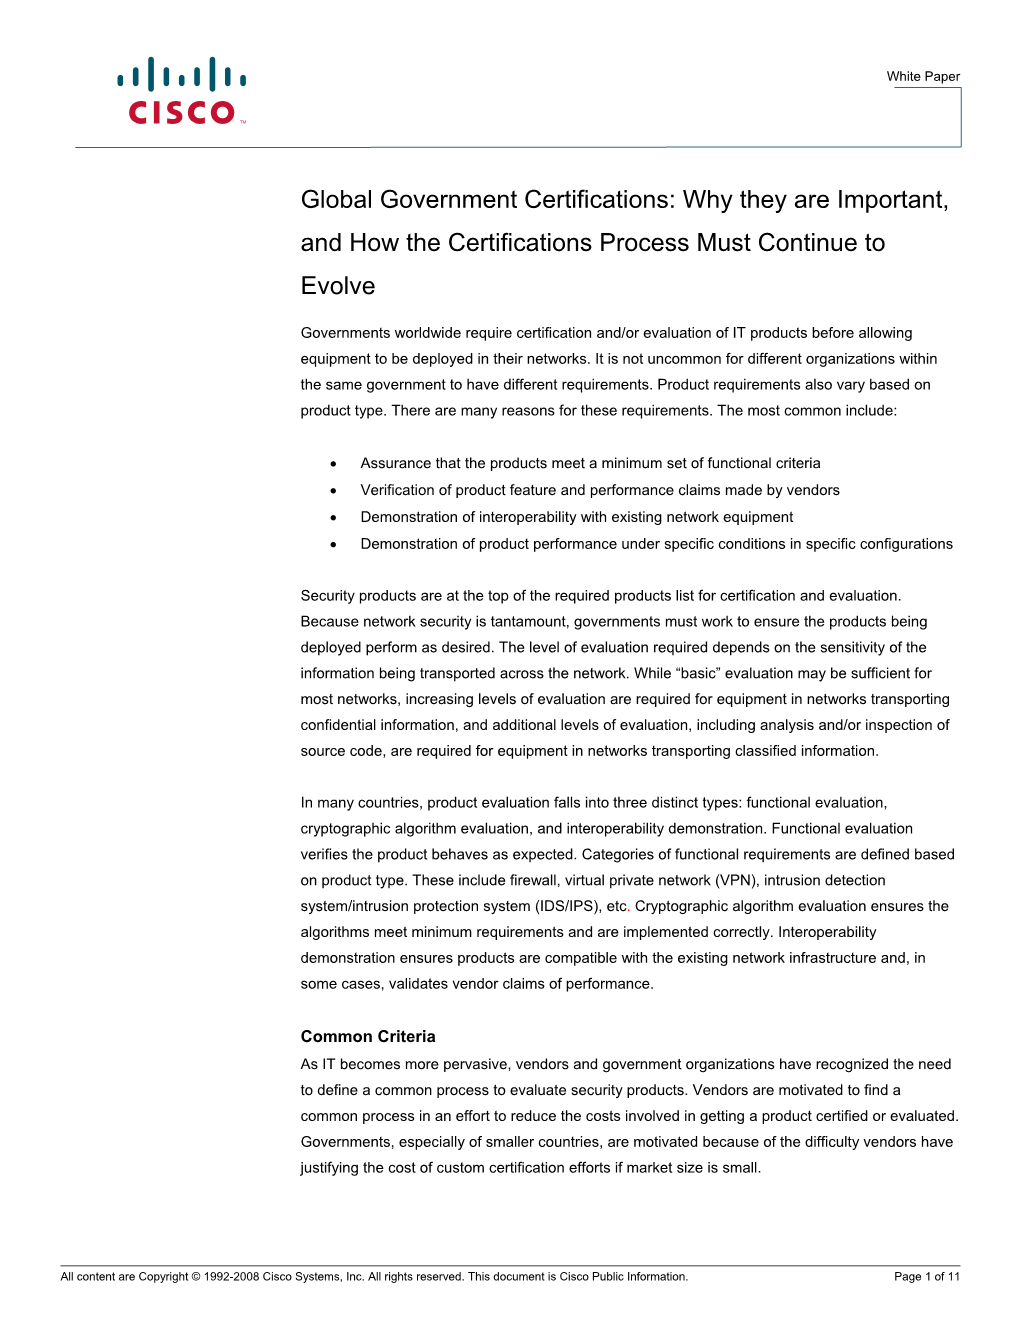 The Importance of Global Government Certifications White Paper